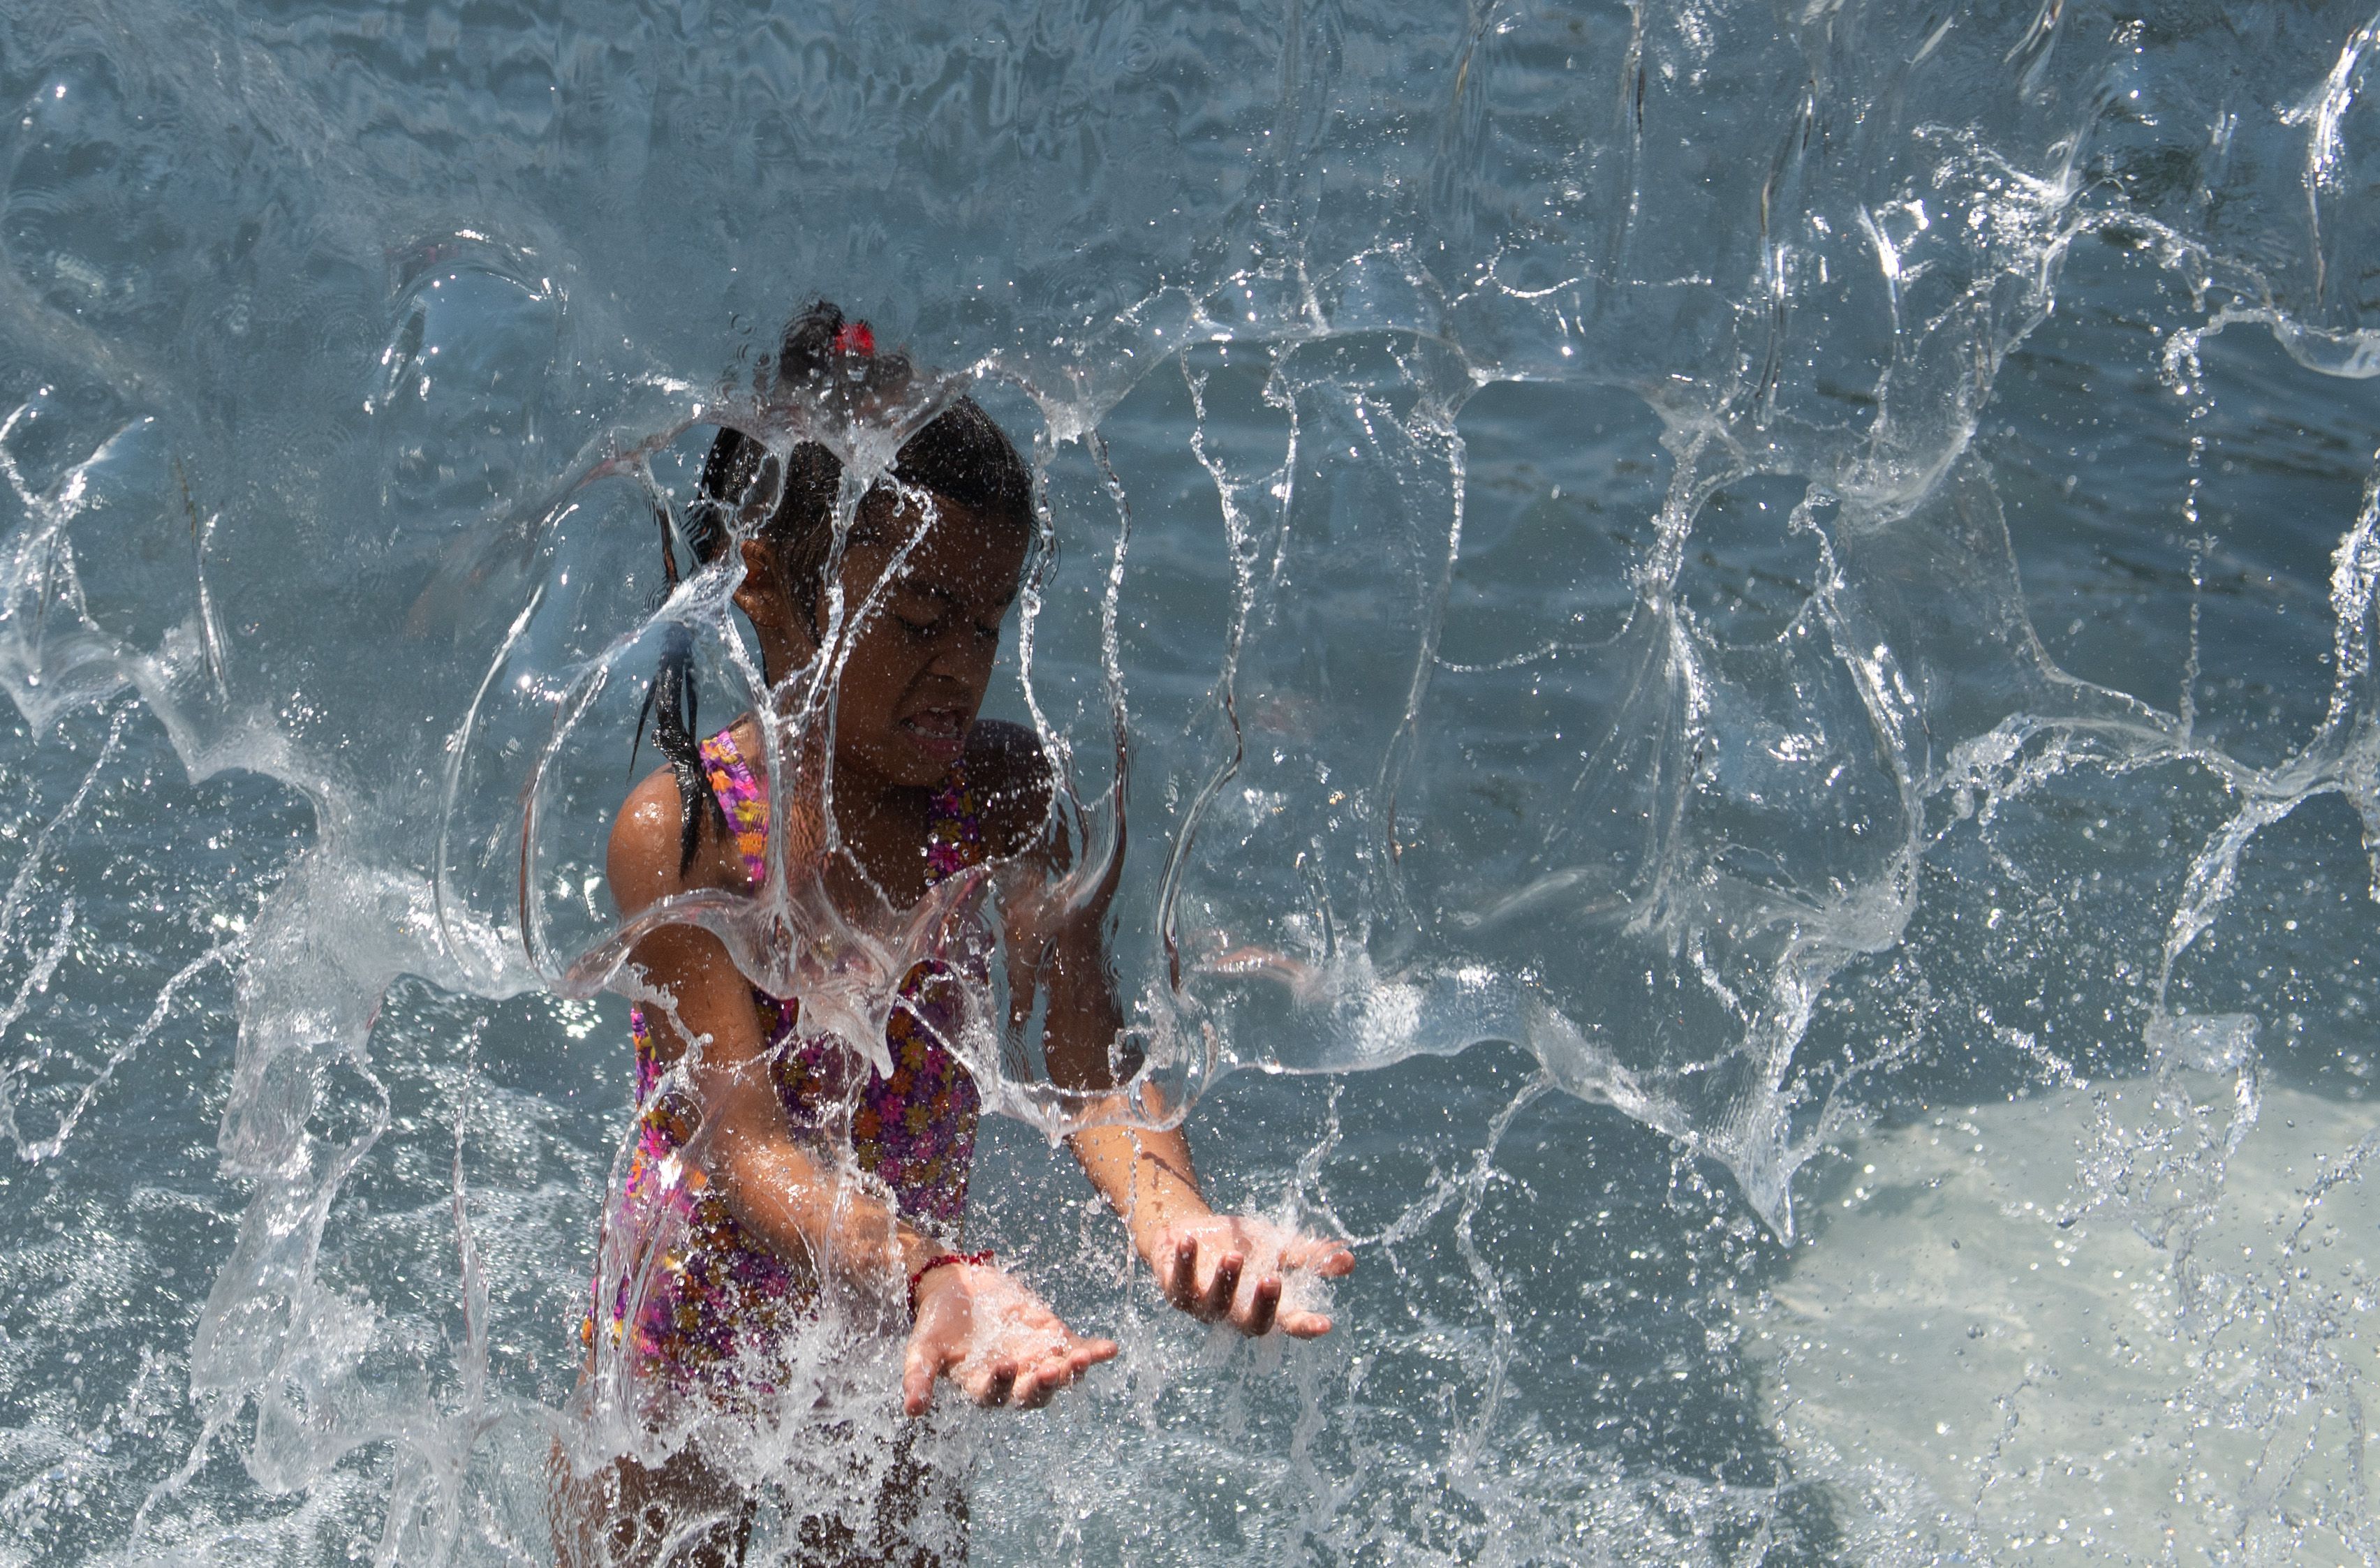  A child plays in a waterfall at Yards Park in Washington, D.C. 